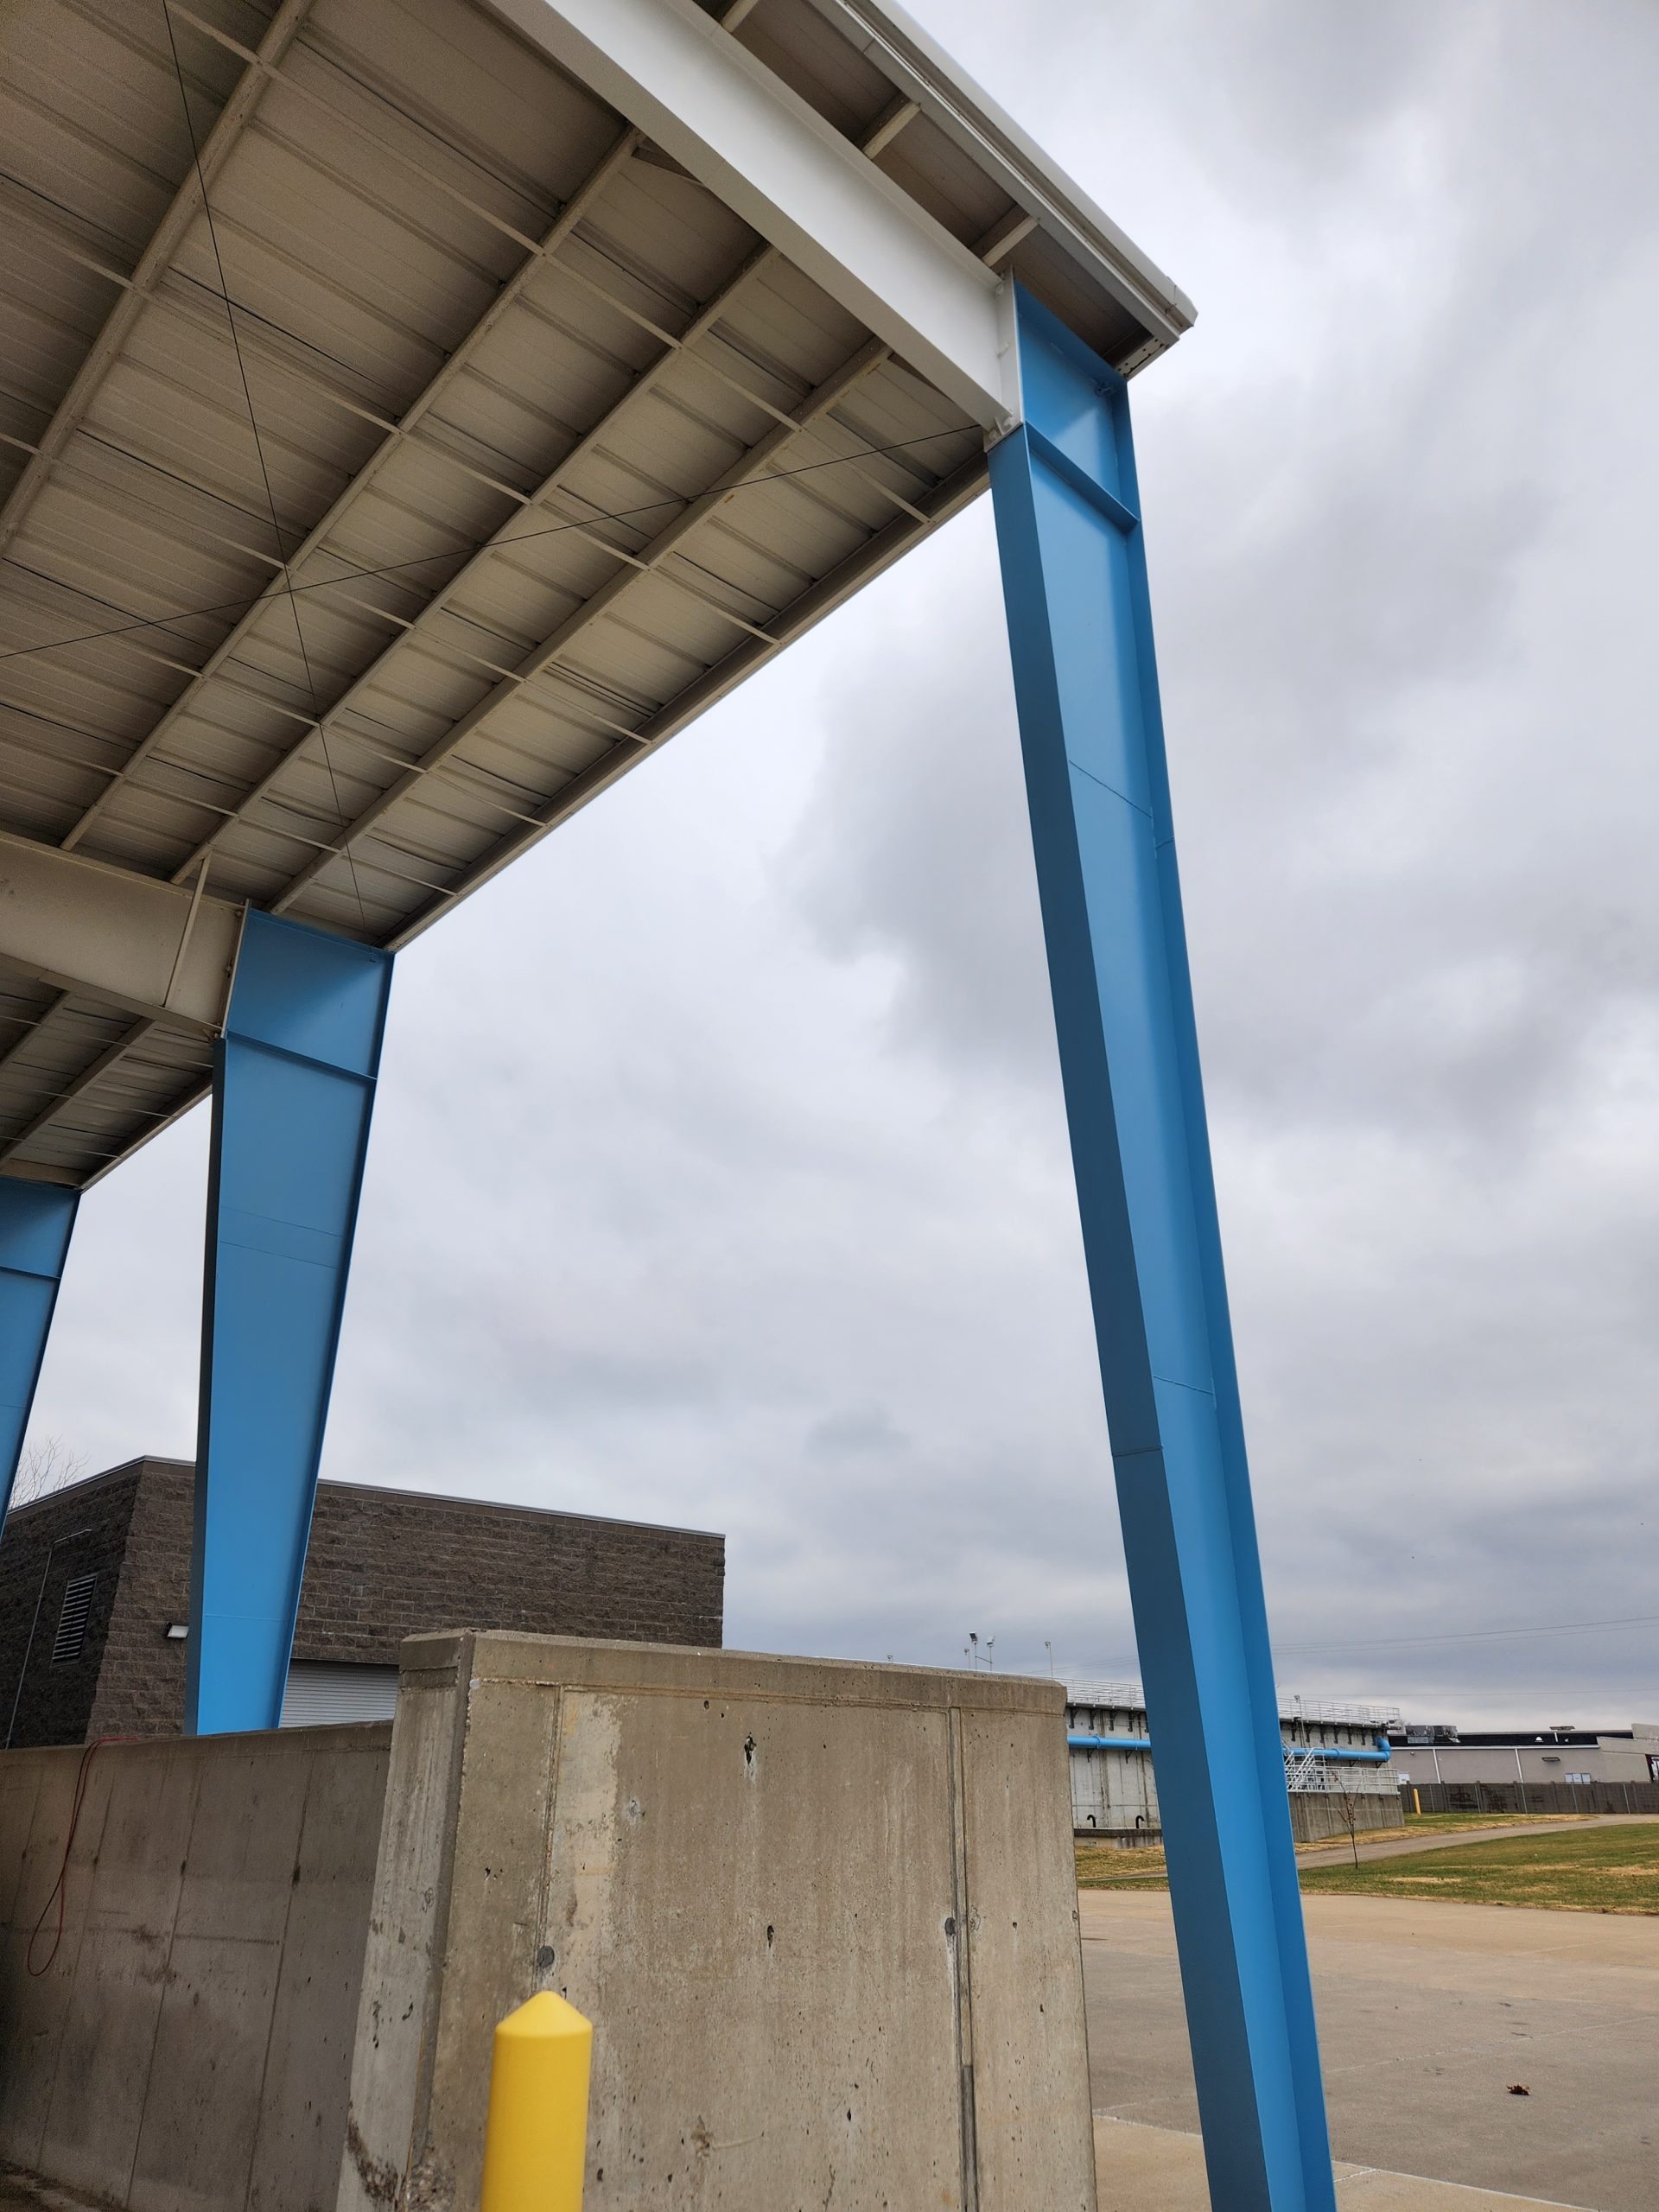 Piping and structural steel on the exterior of the plant's concrete basins.